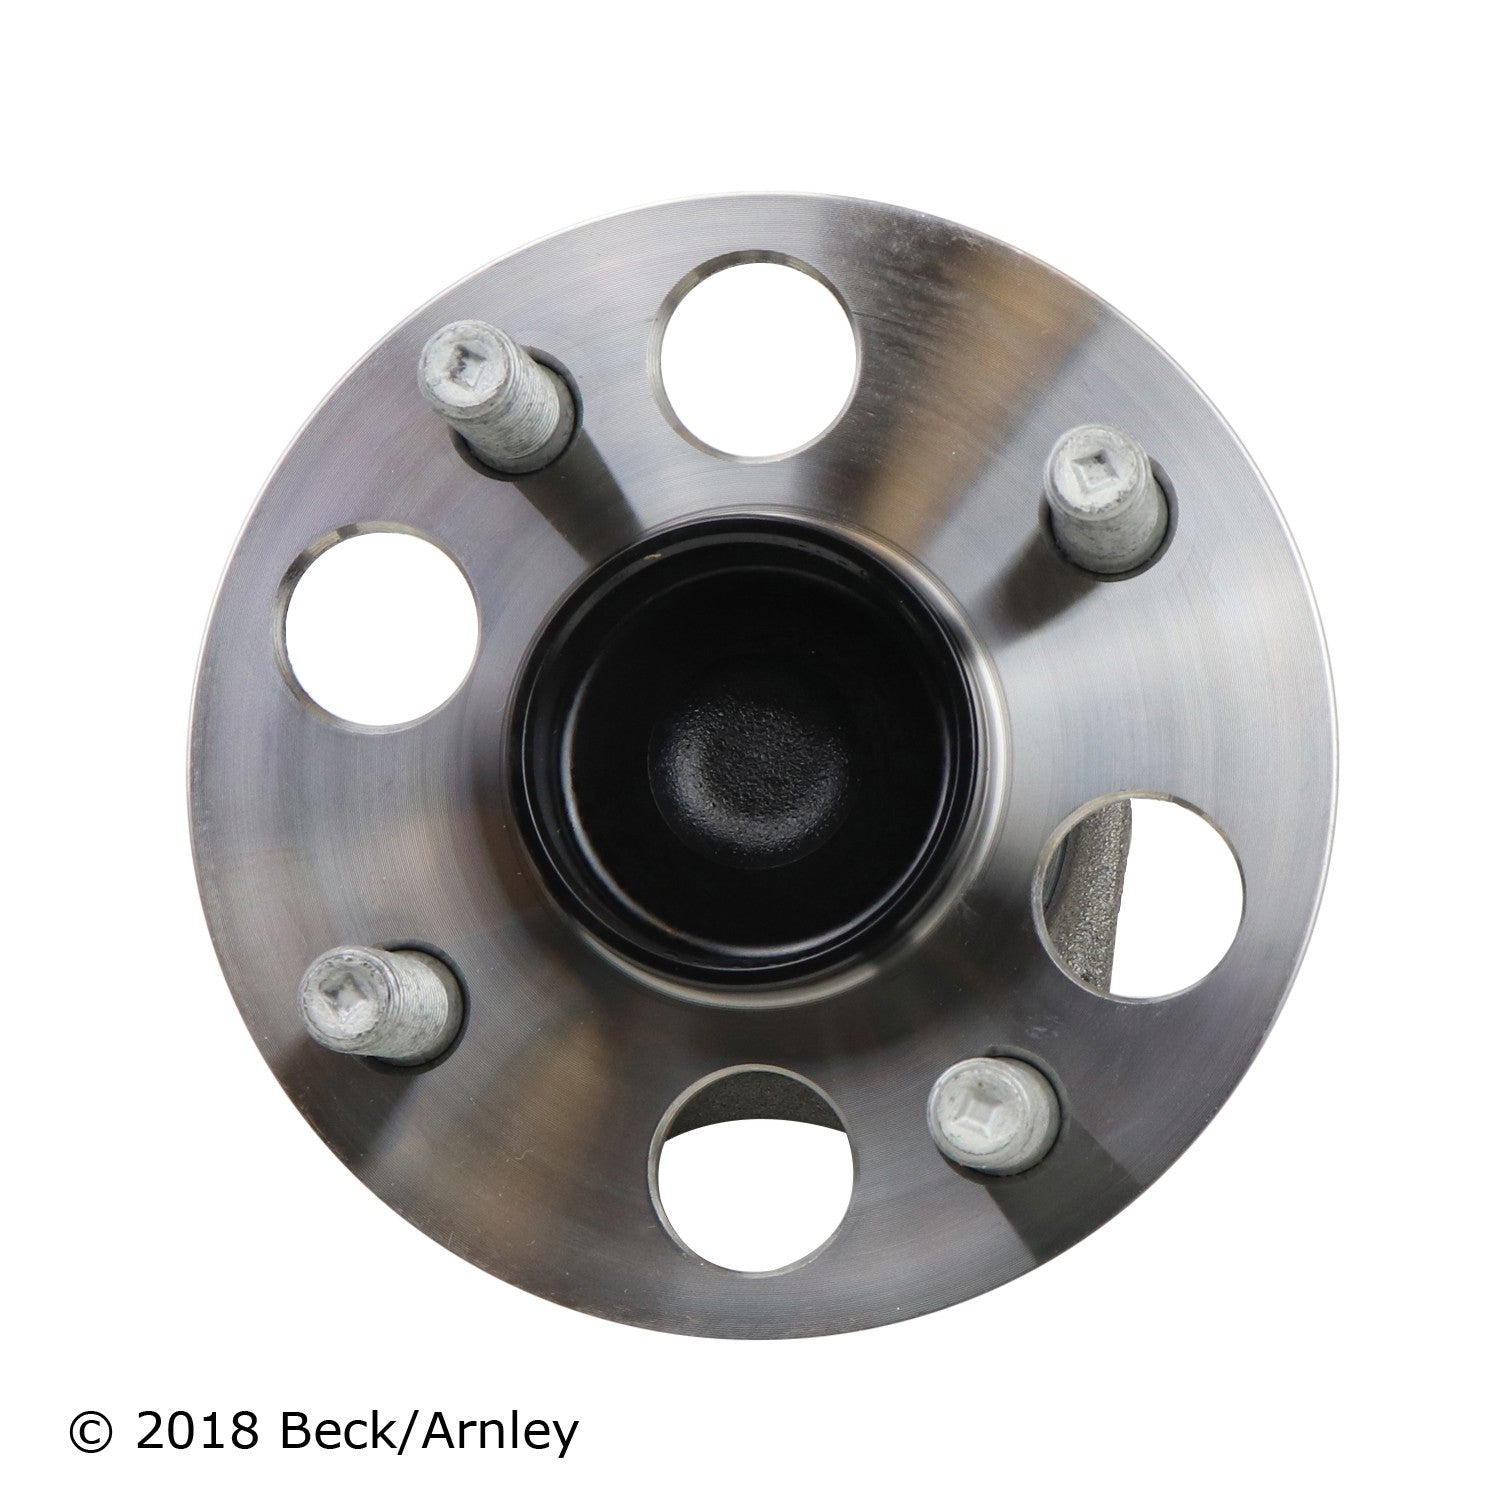 Beck Arnley 051-6272 Rear Wheel Bearing and Hub Assembly for Scion iQ Toyota Prius C Yaris FWD